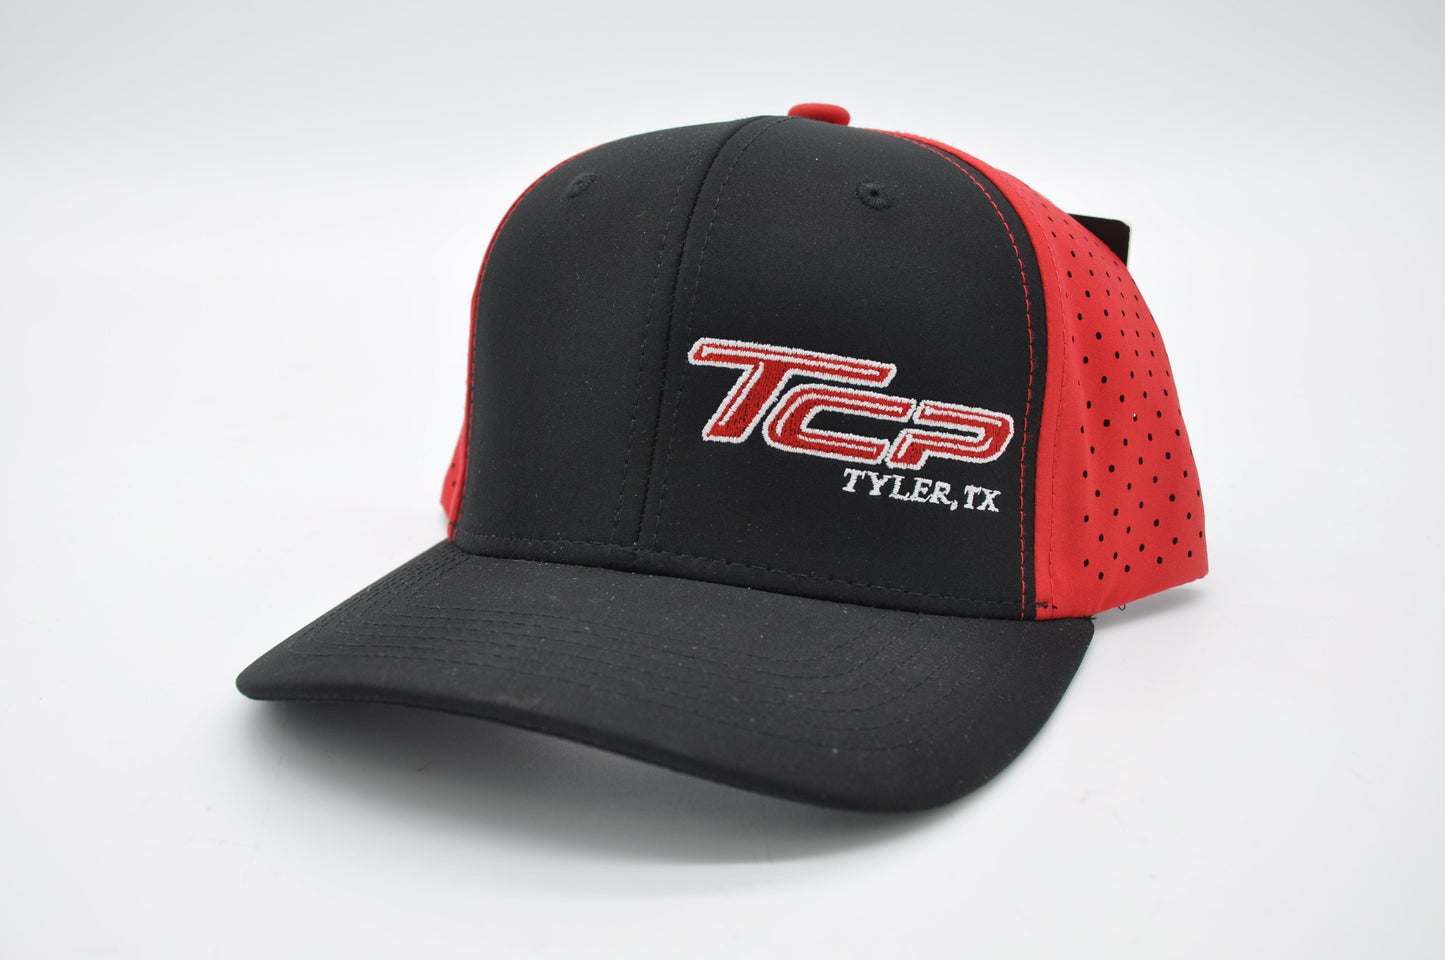 TCP Assorted Mesh Hats (Black, Red, and Grey Mesh)